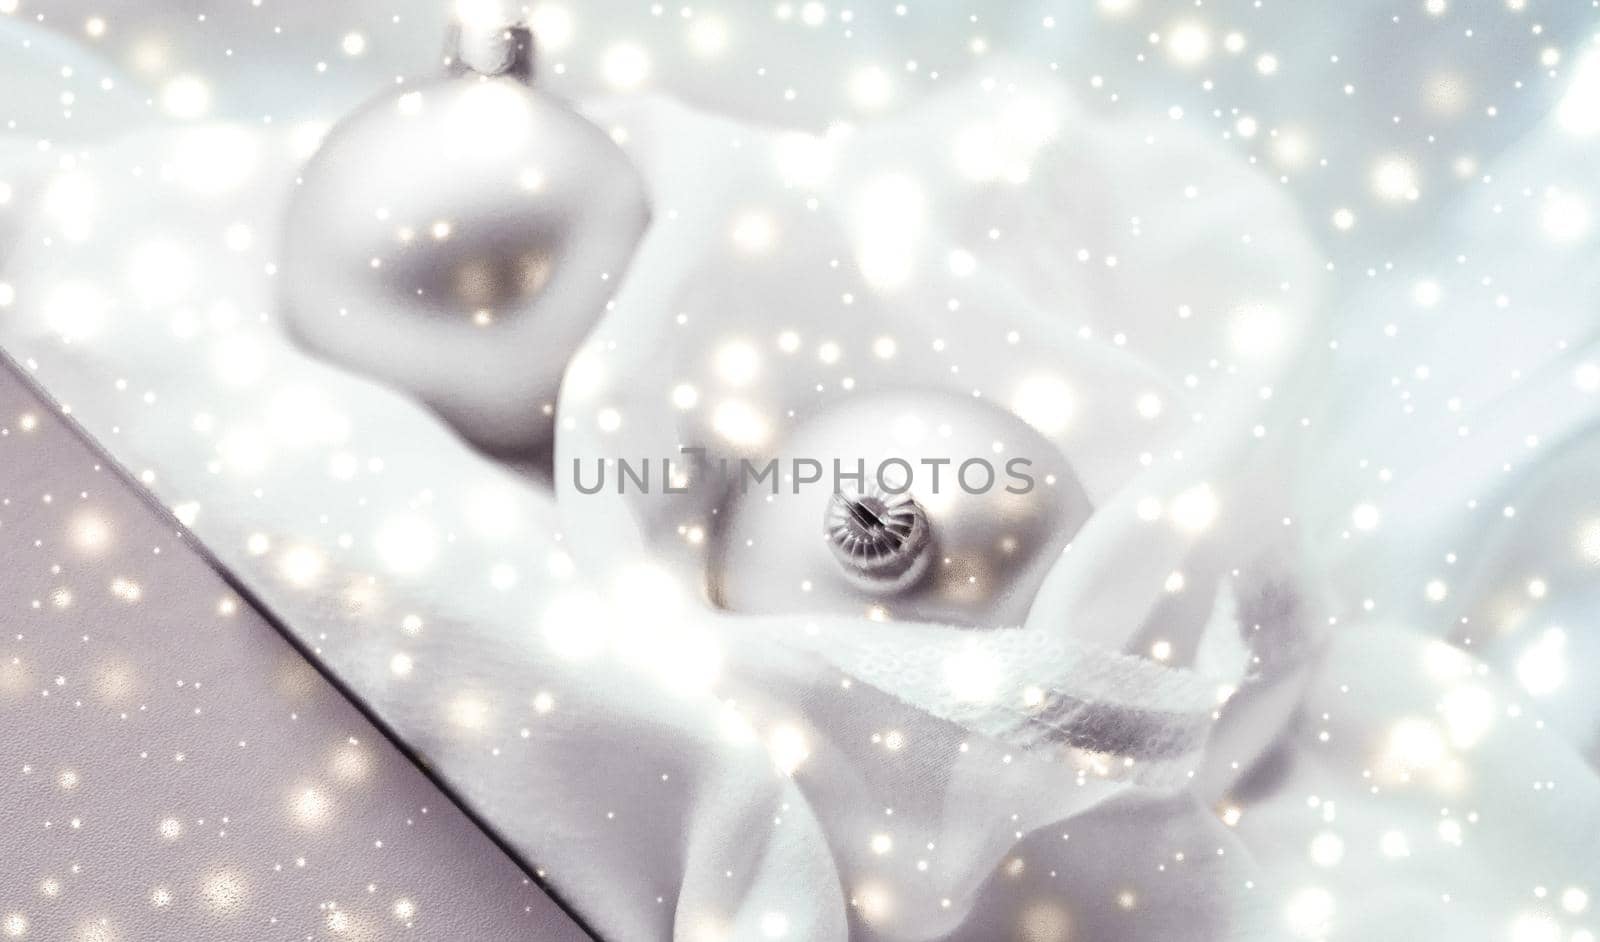 Holidays branding, glamour and decoration concept - Christmas magic holiday background, festive baubles, silver vintage gift box and golden glitter as winter season present for luxury brand design